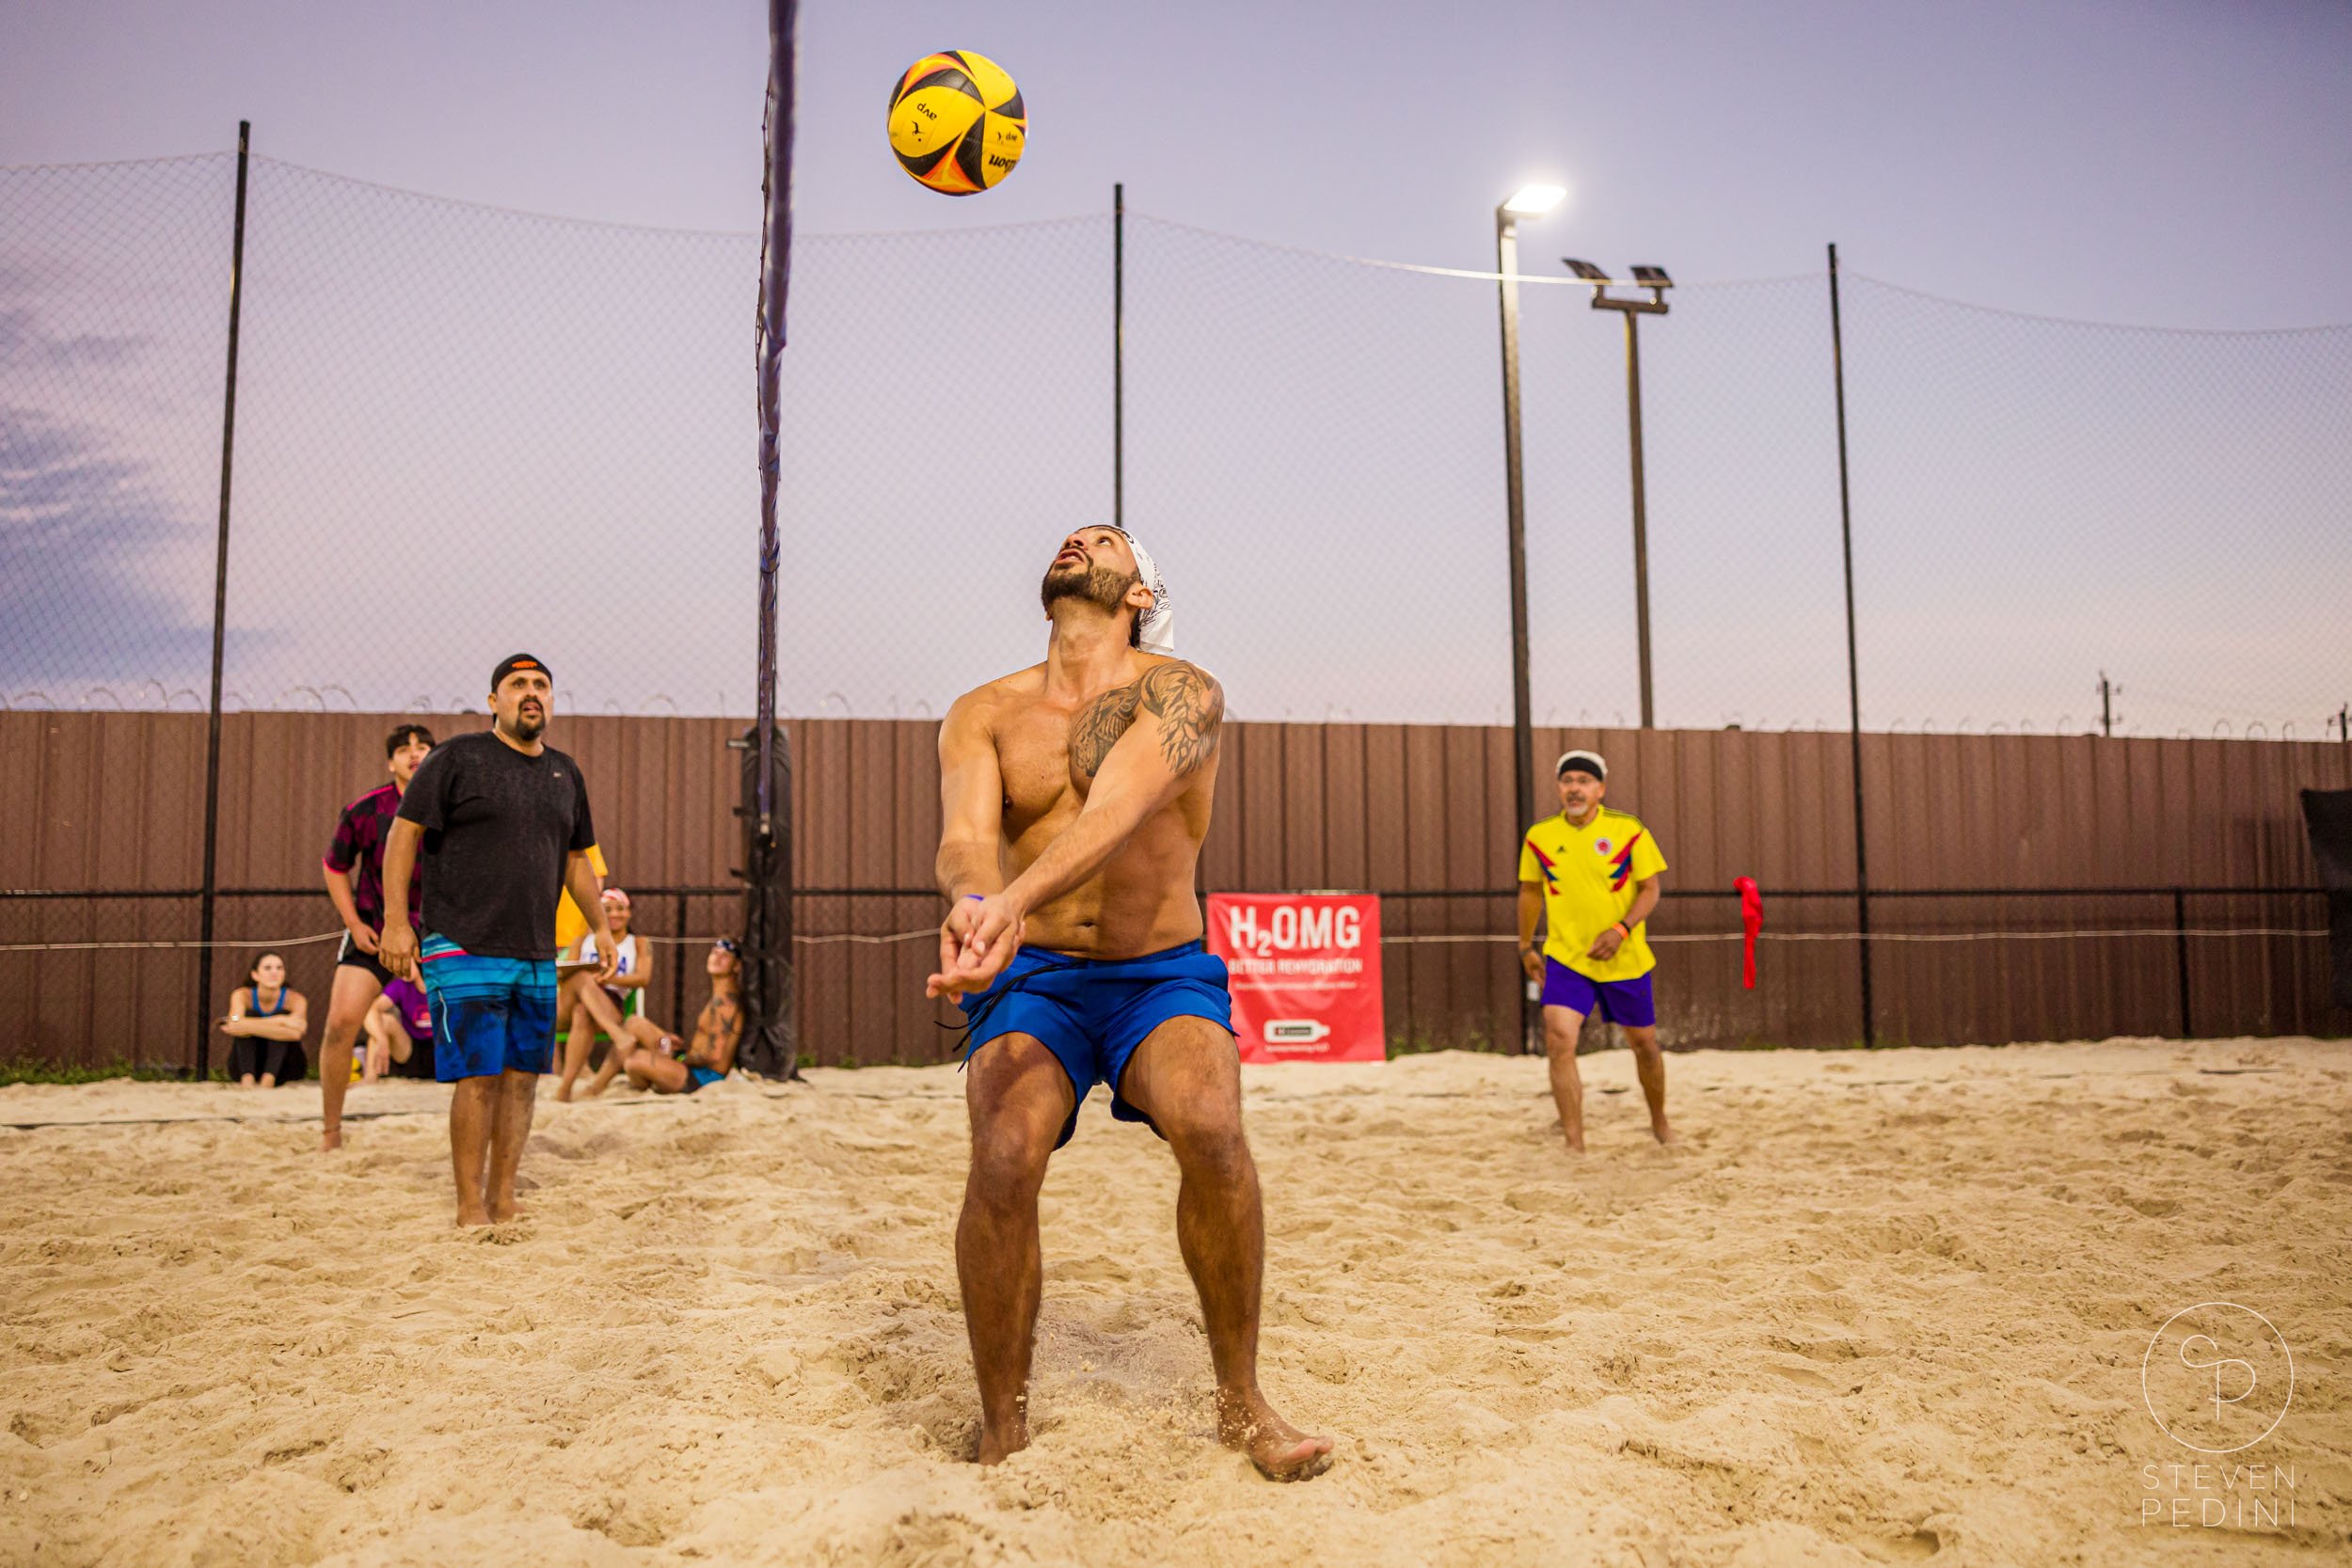 Steven Pedini Photography - Bumpy Pickle - Sand Volleyball - Houston TX - World Cup of Volleyball - 00278.jpg